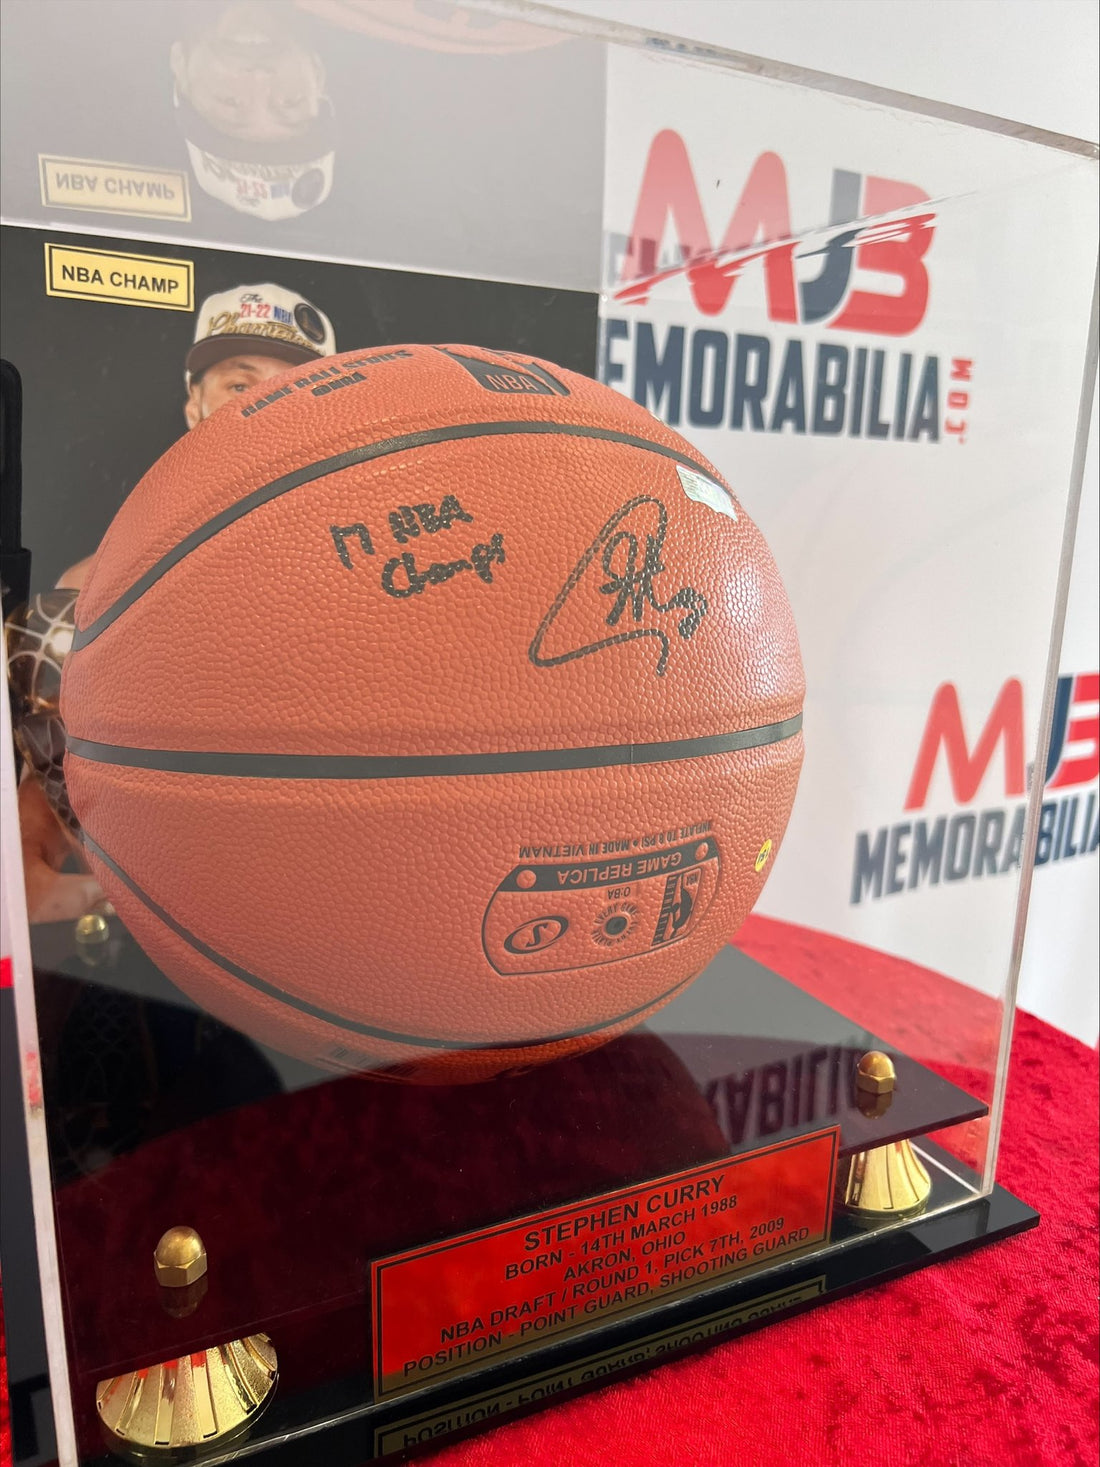 Melbourne Superfan Celebrates New Acquisition: A Signed Stephen Curry Basketball